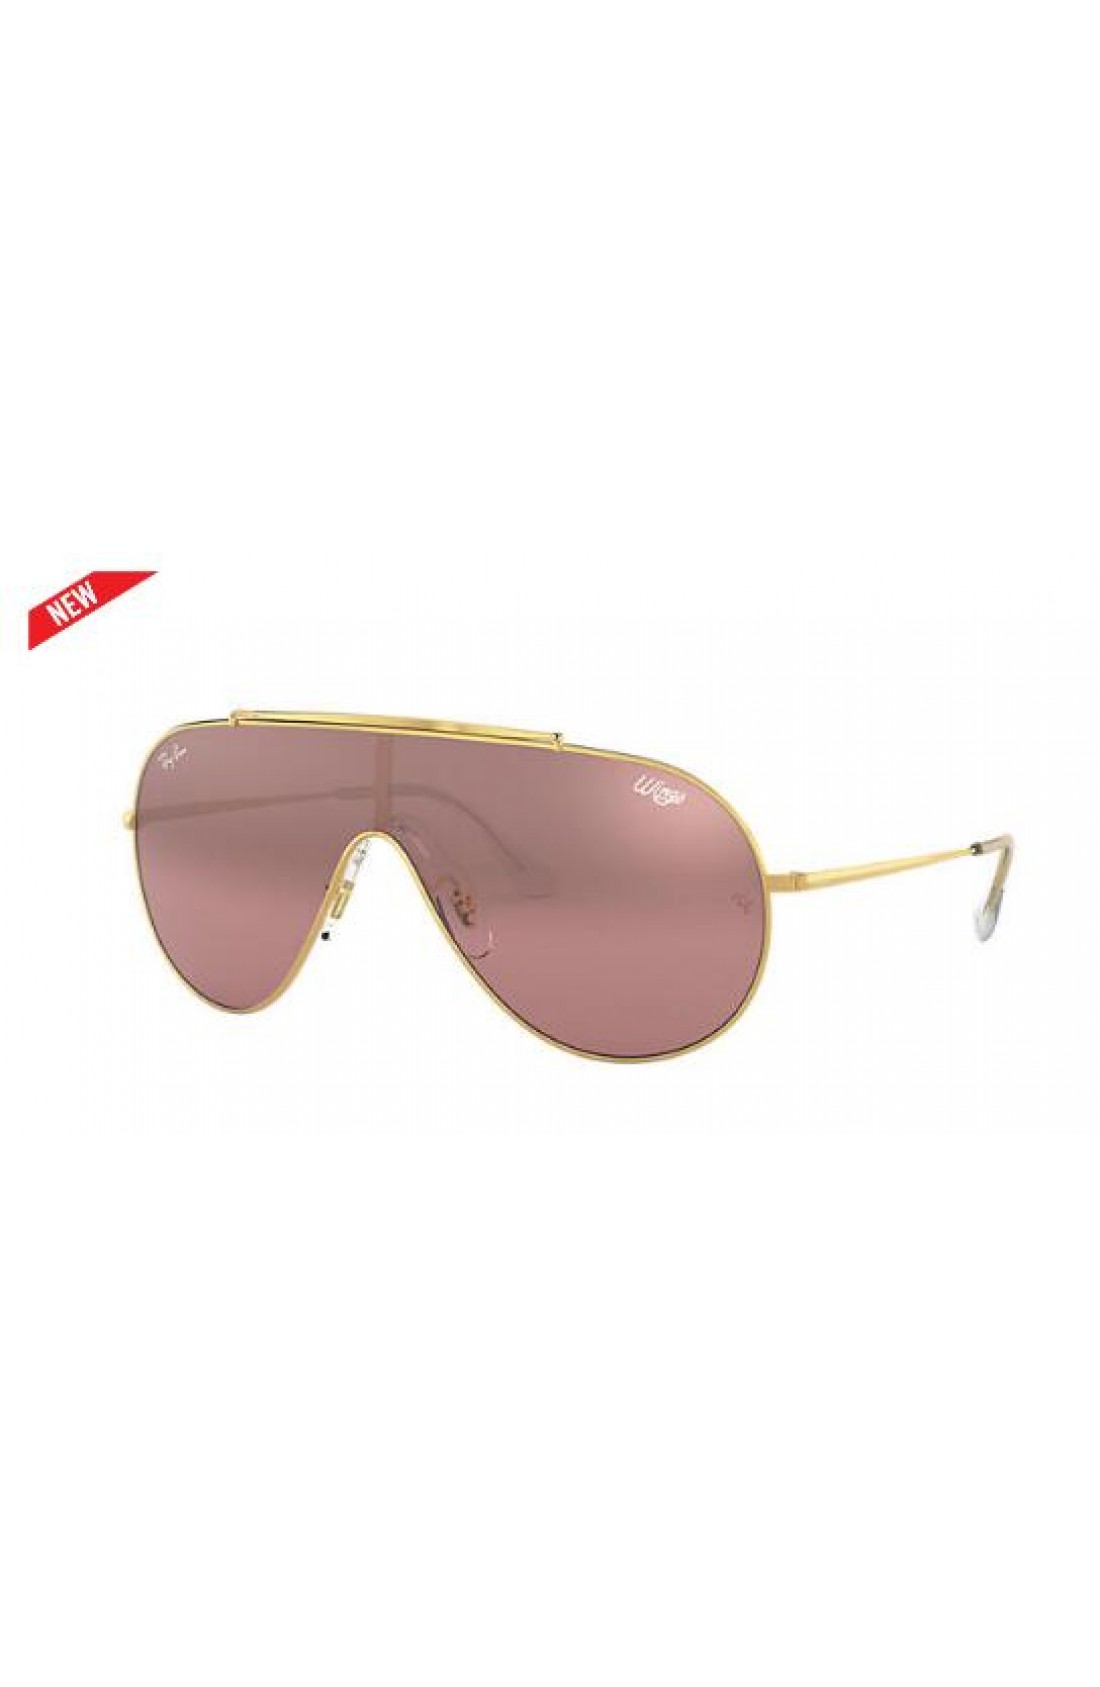 ray ban sale outlet